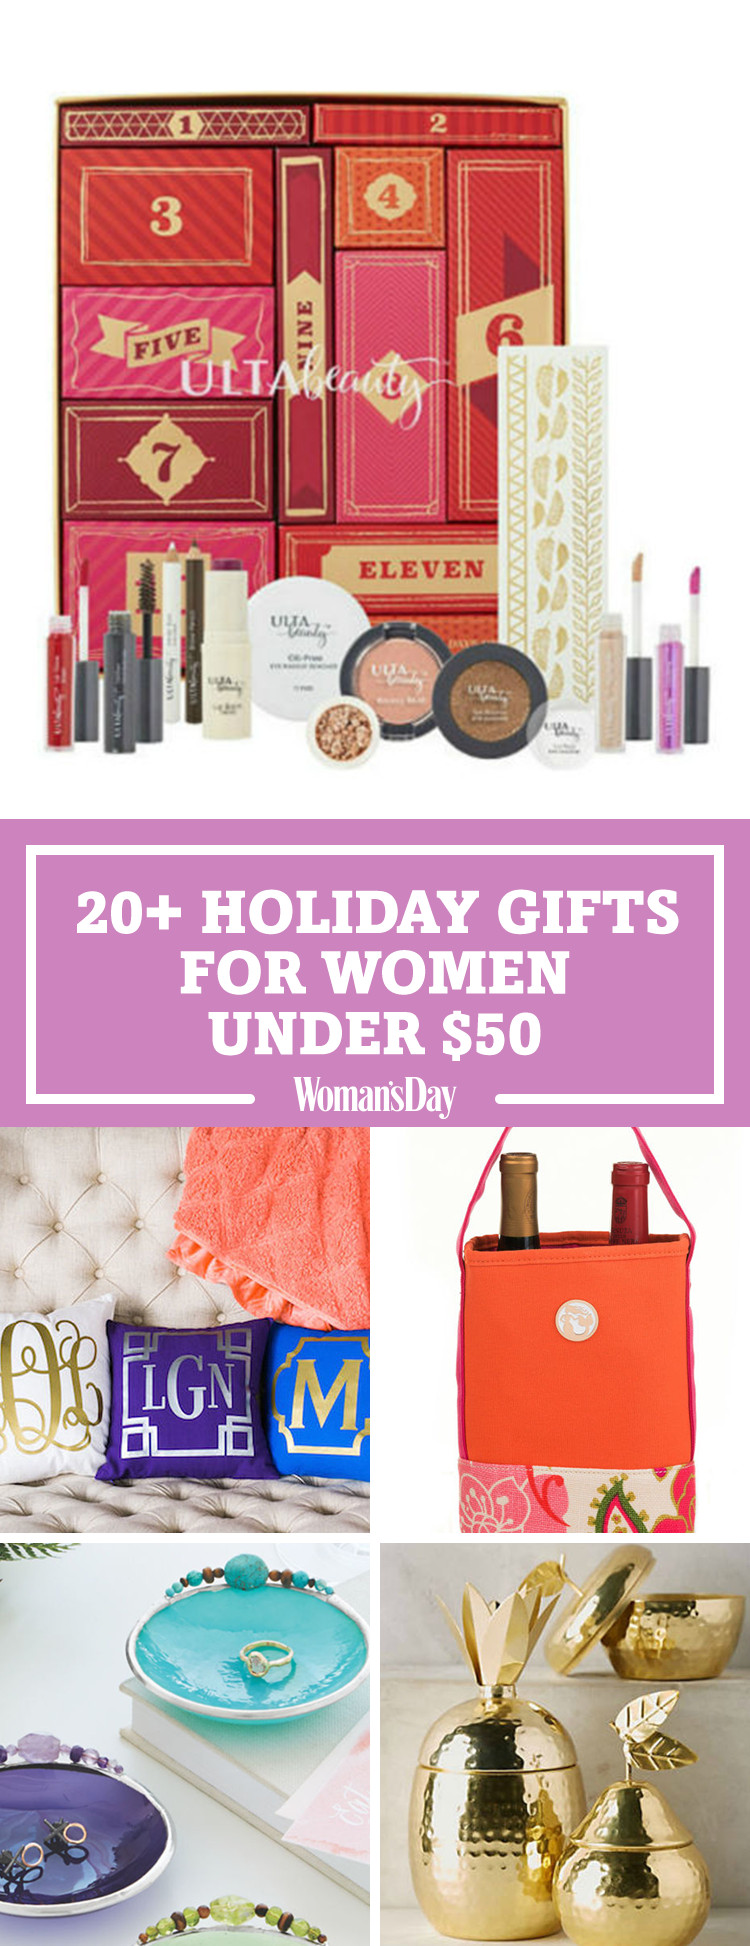 Holiday Gift Ideas For Women
 36 Best Christmas Gifts for Women Under $50 Unique